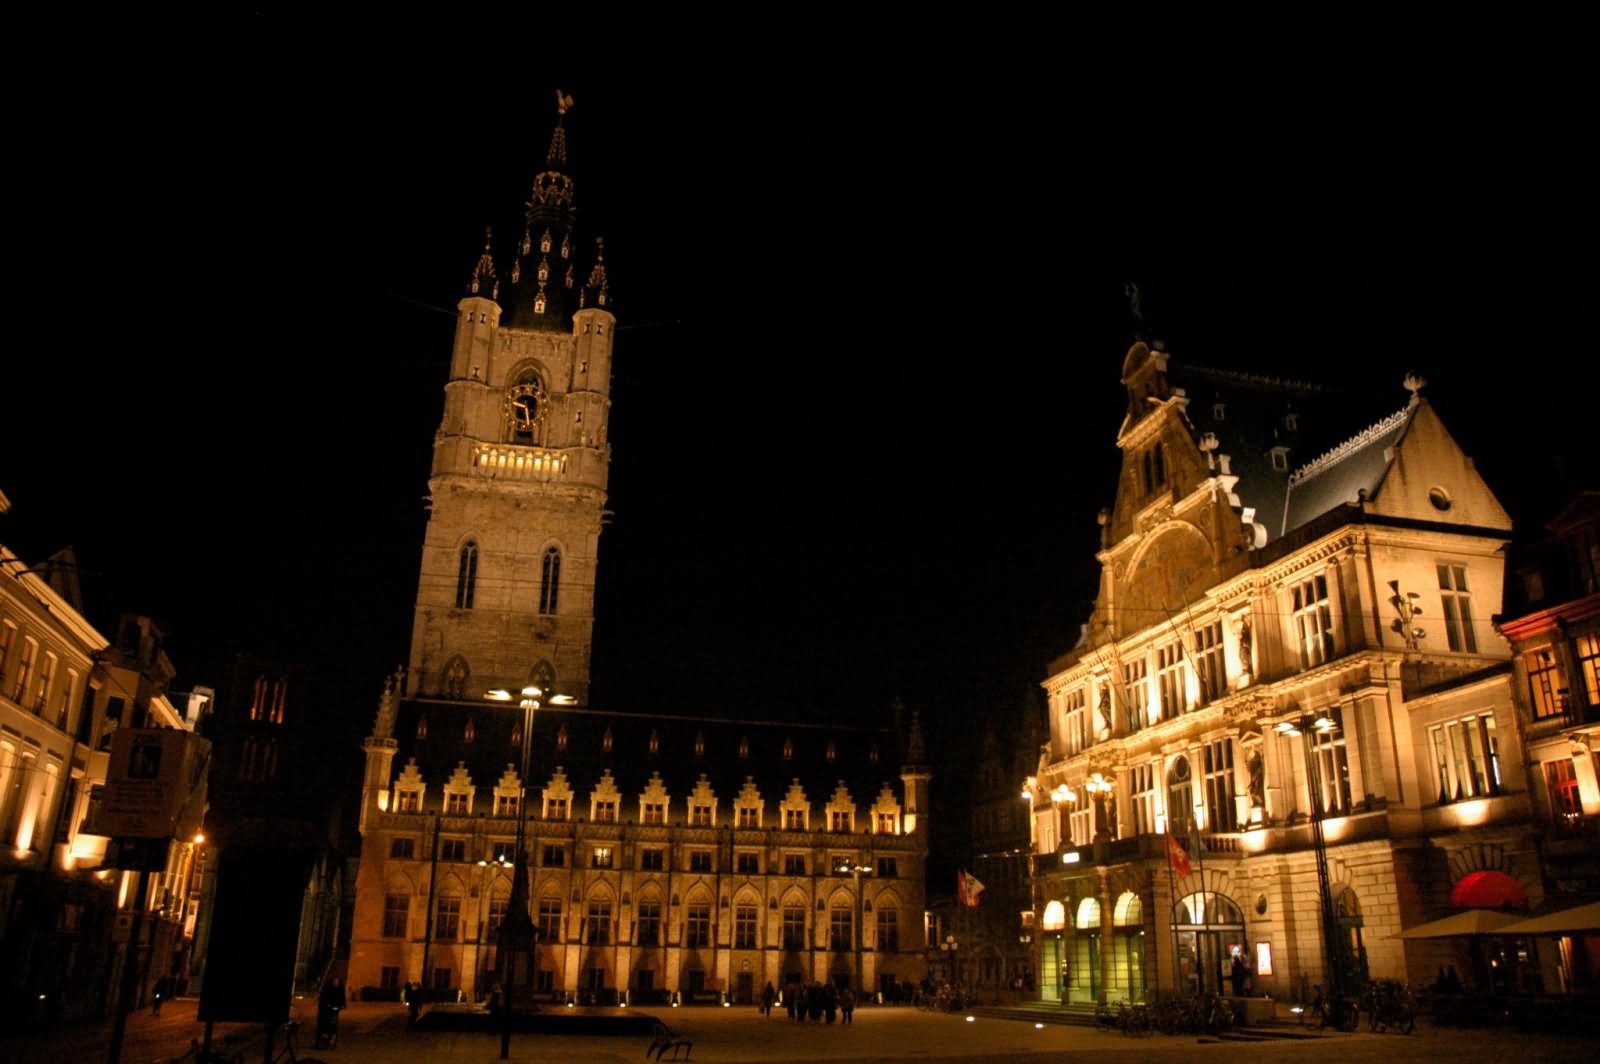 The Belfry of Ghent Illuminated At Night